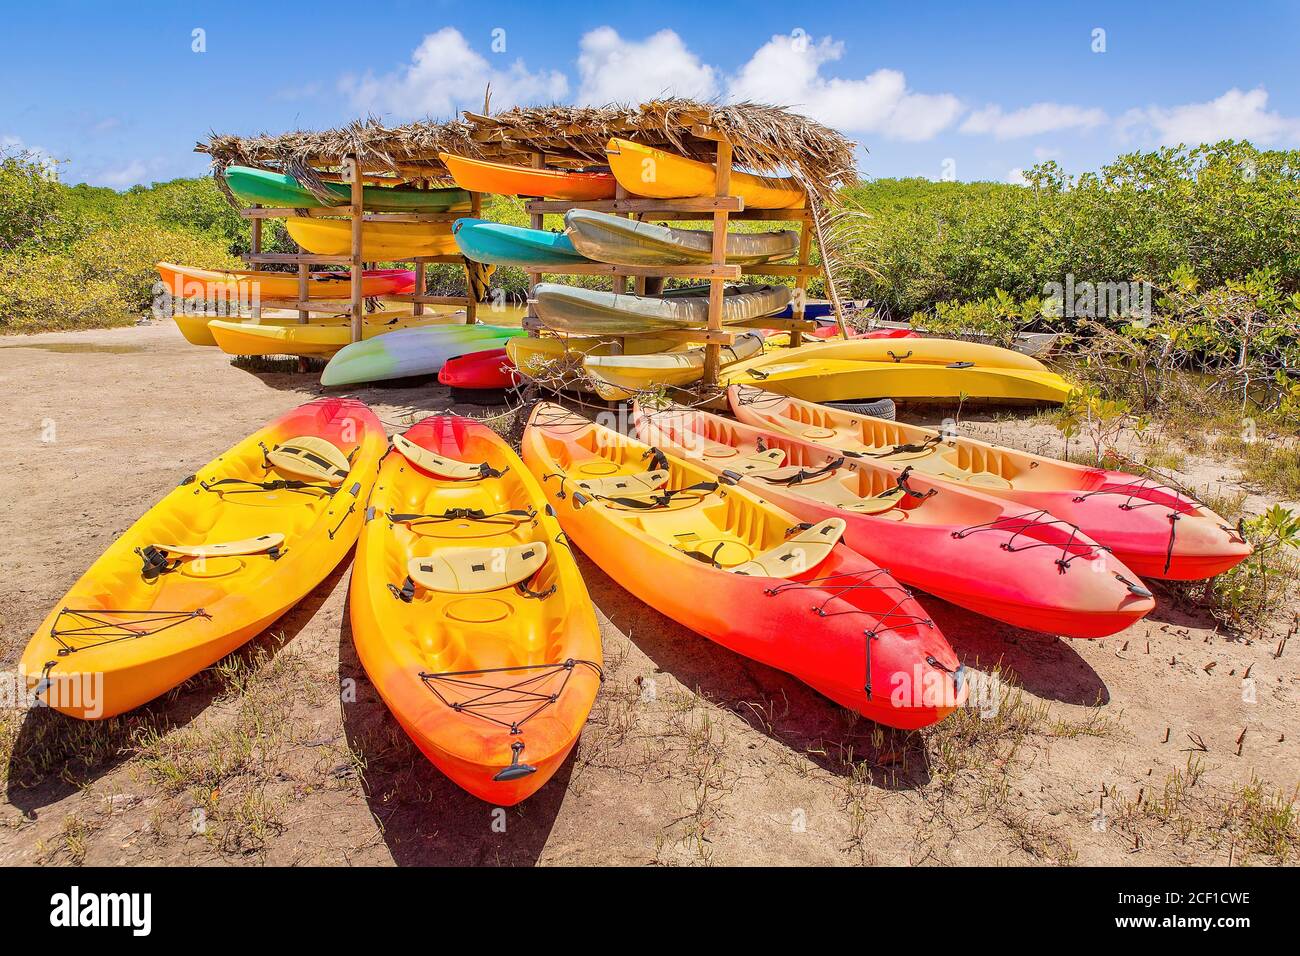 Many colorful kayaks parked in mangrove forest on the island Bonaire Stock Photo